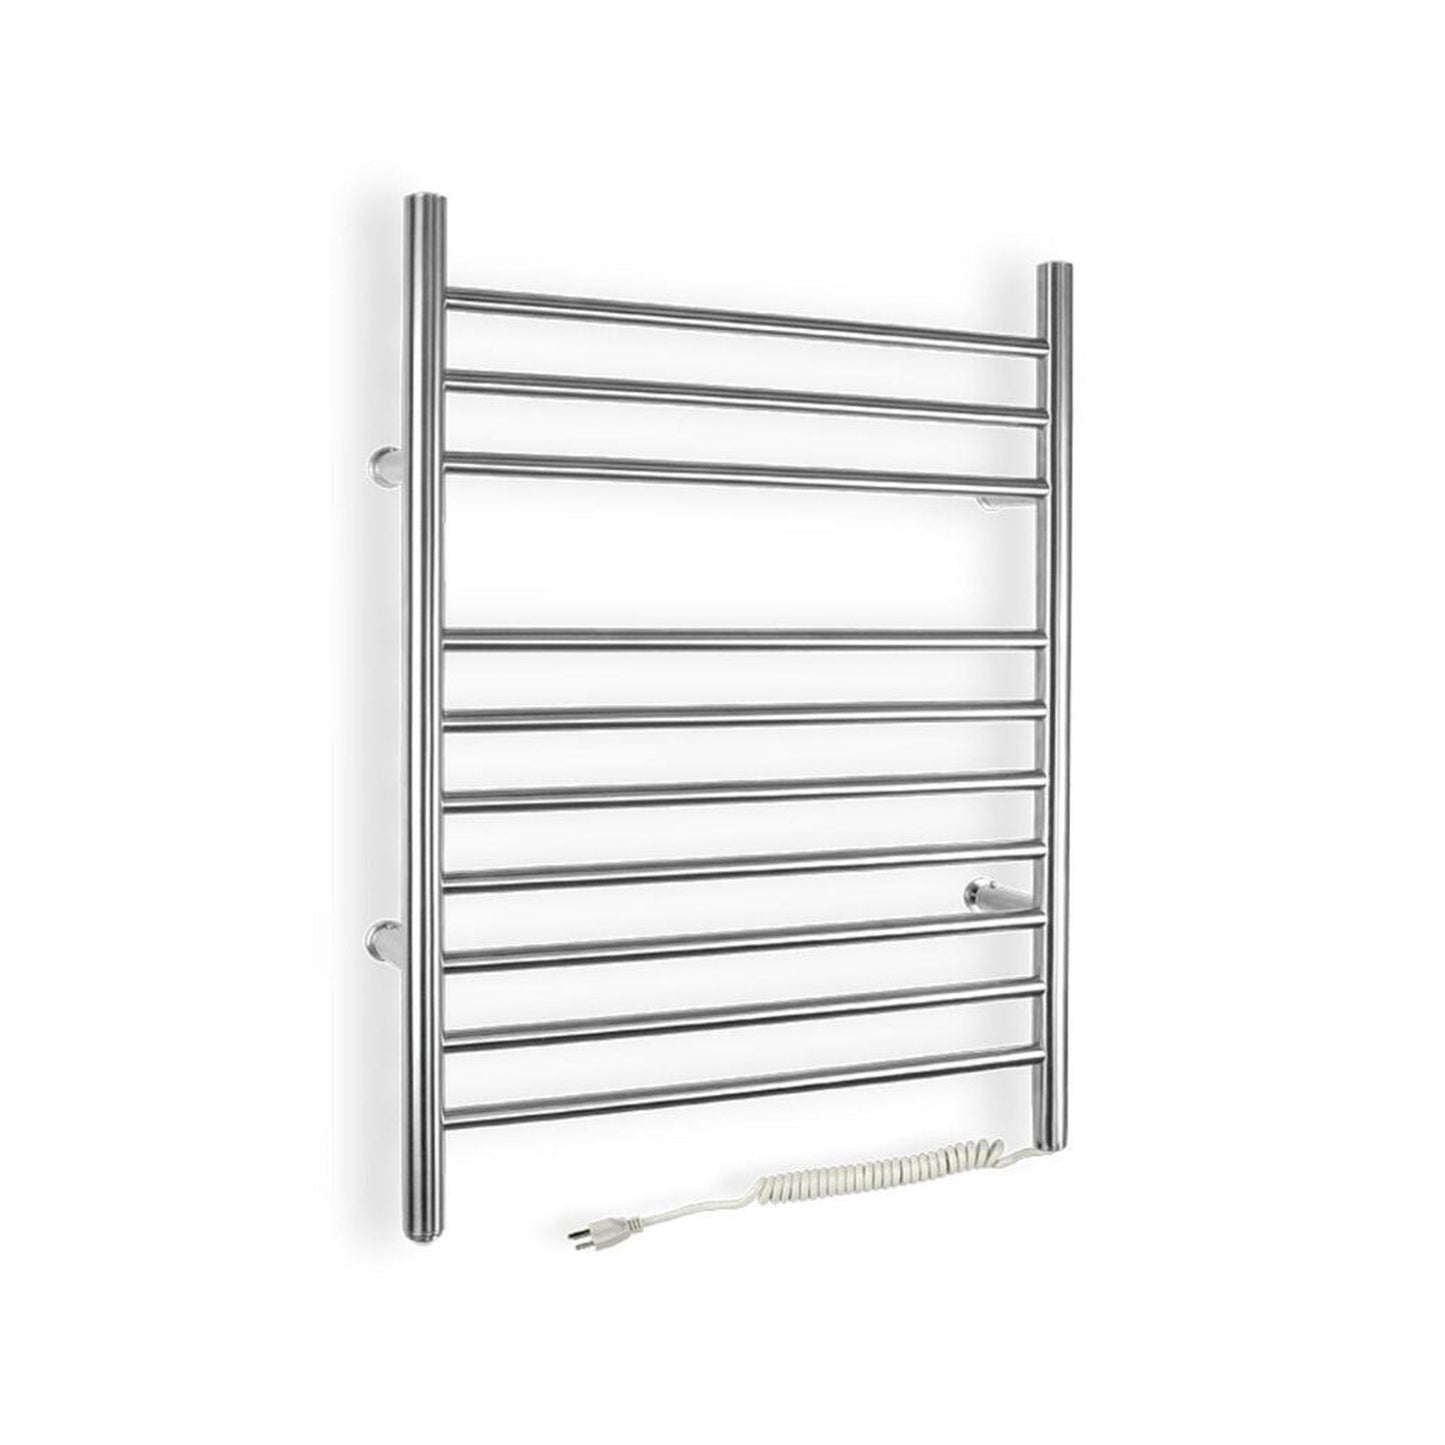 WarmlyYours Infinity 24" x 32" Brushed Stainless Steel Wall-Mounted 10-Bar Plug-In Towel Warmer